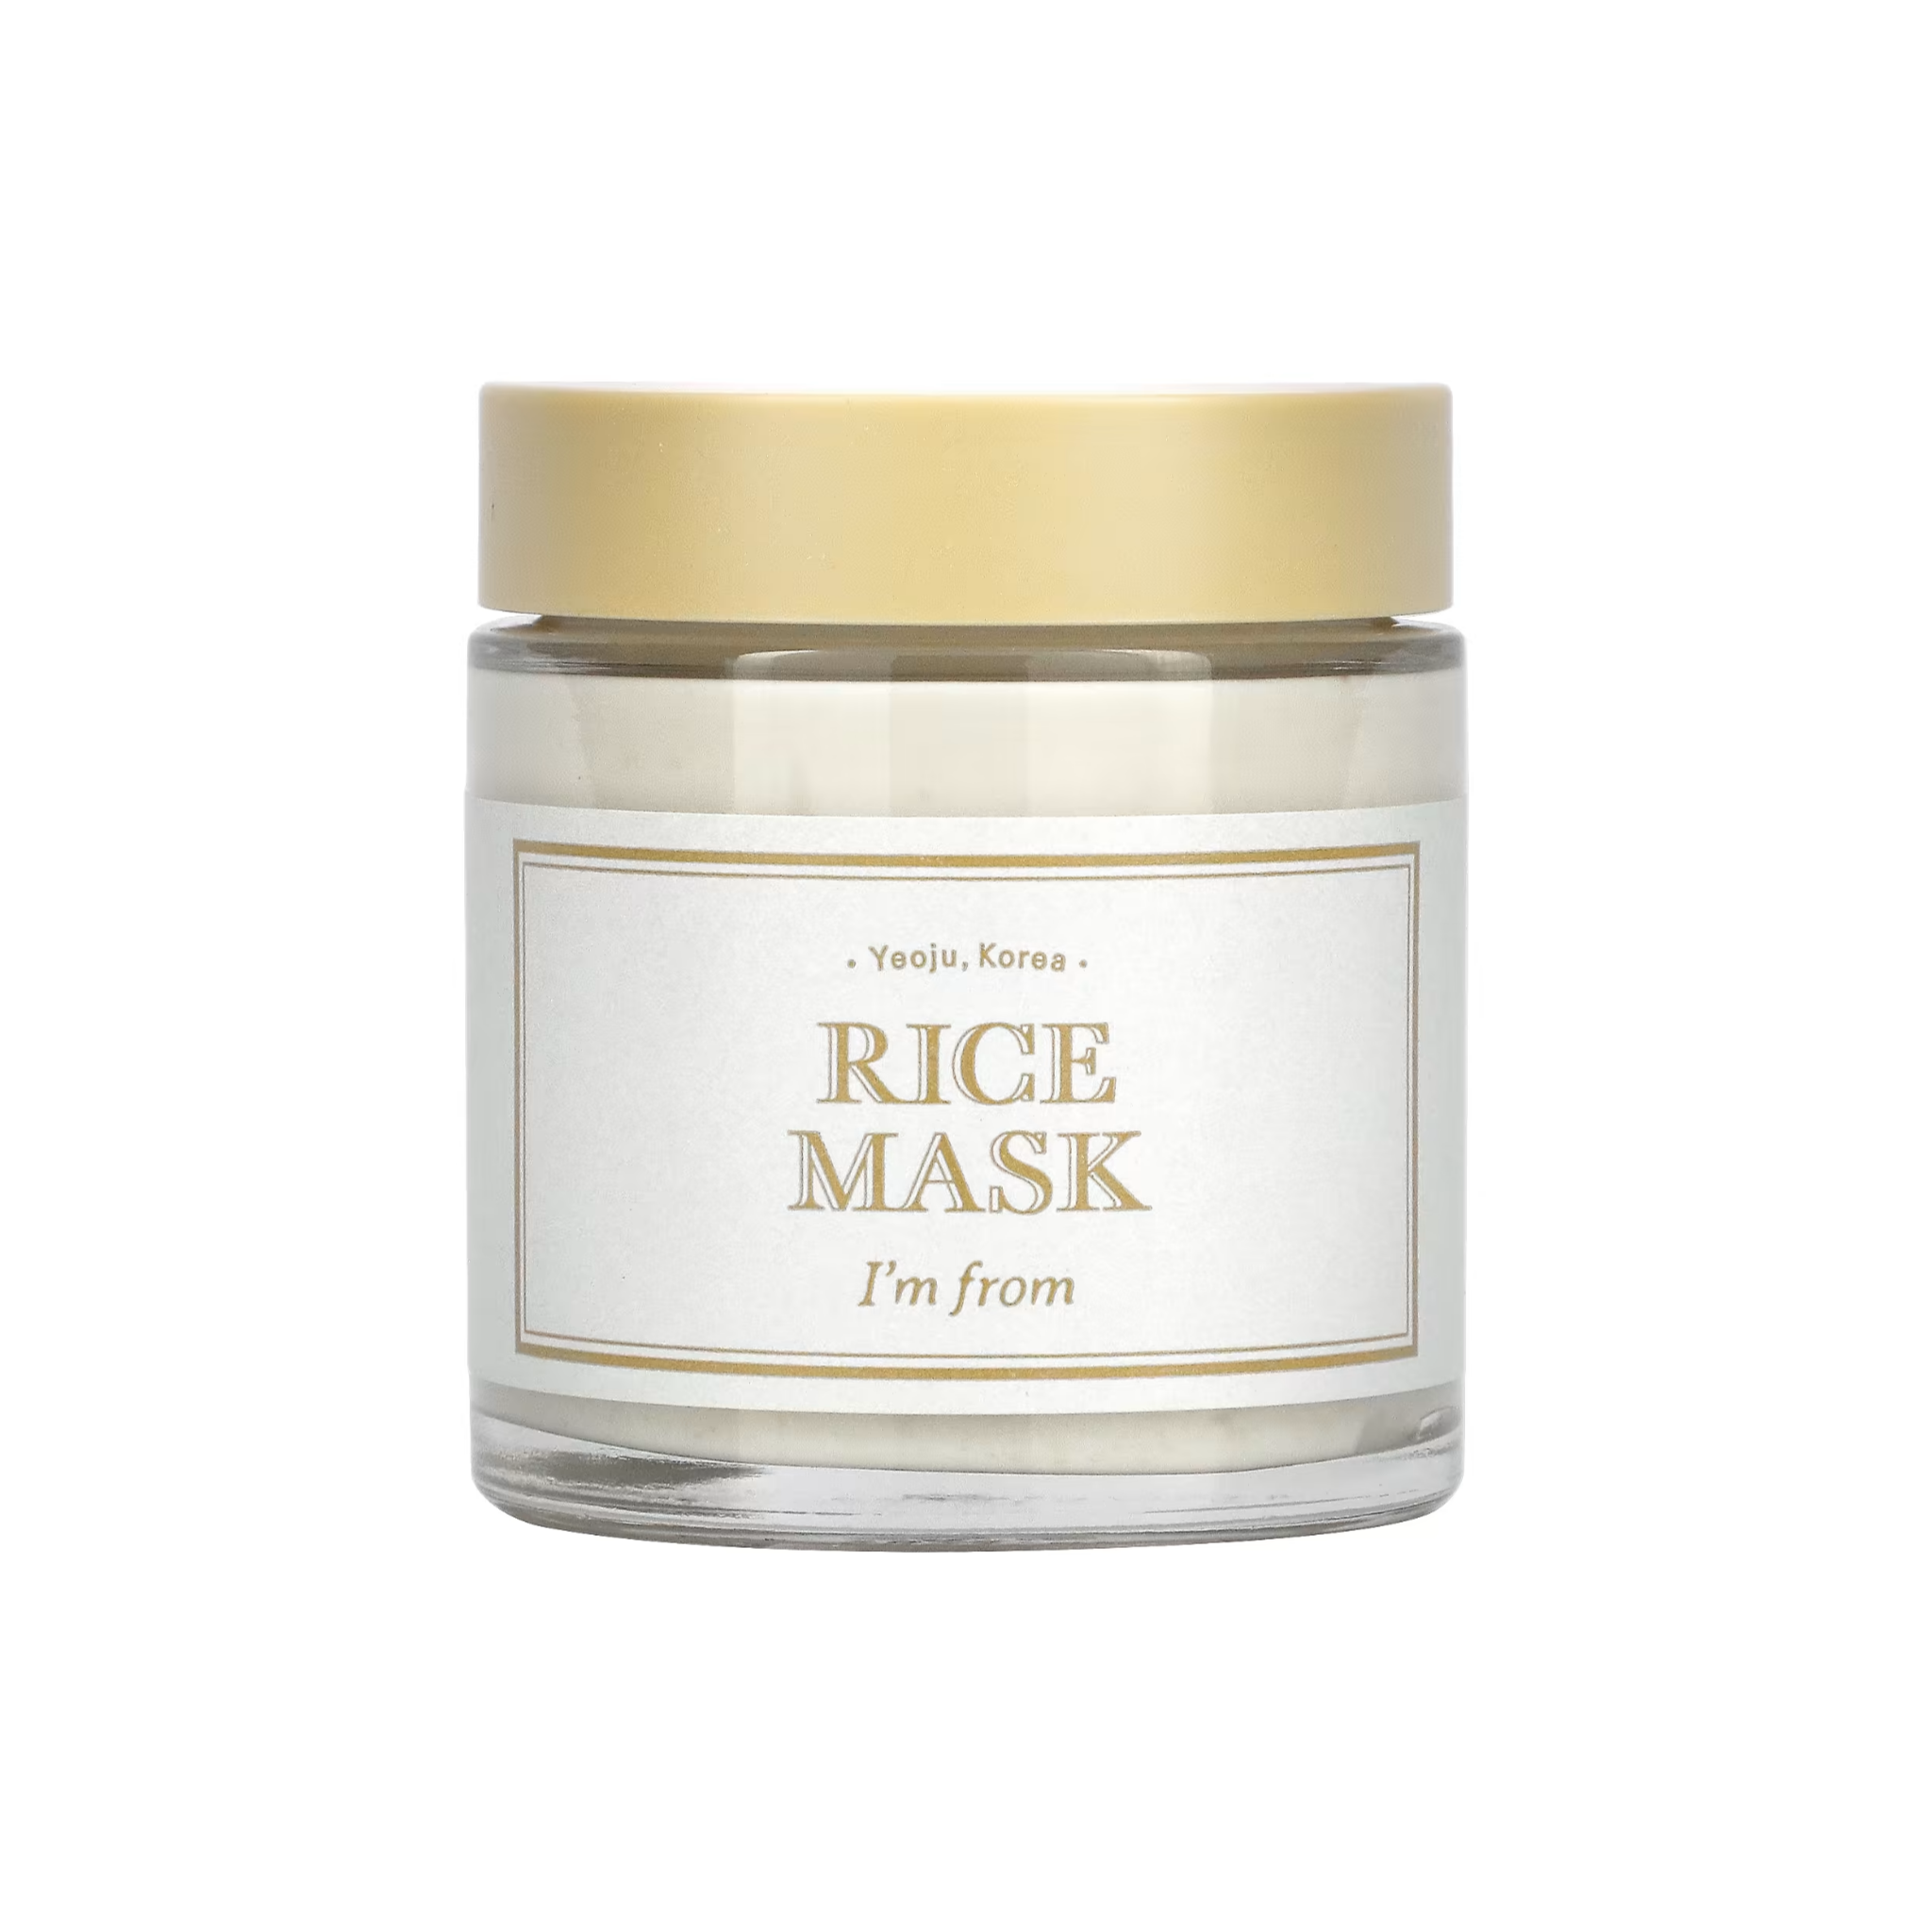 IM FROM Rice Mask (110g)